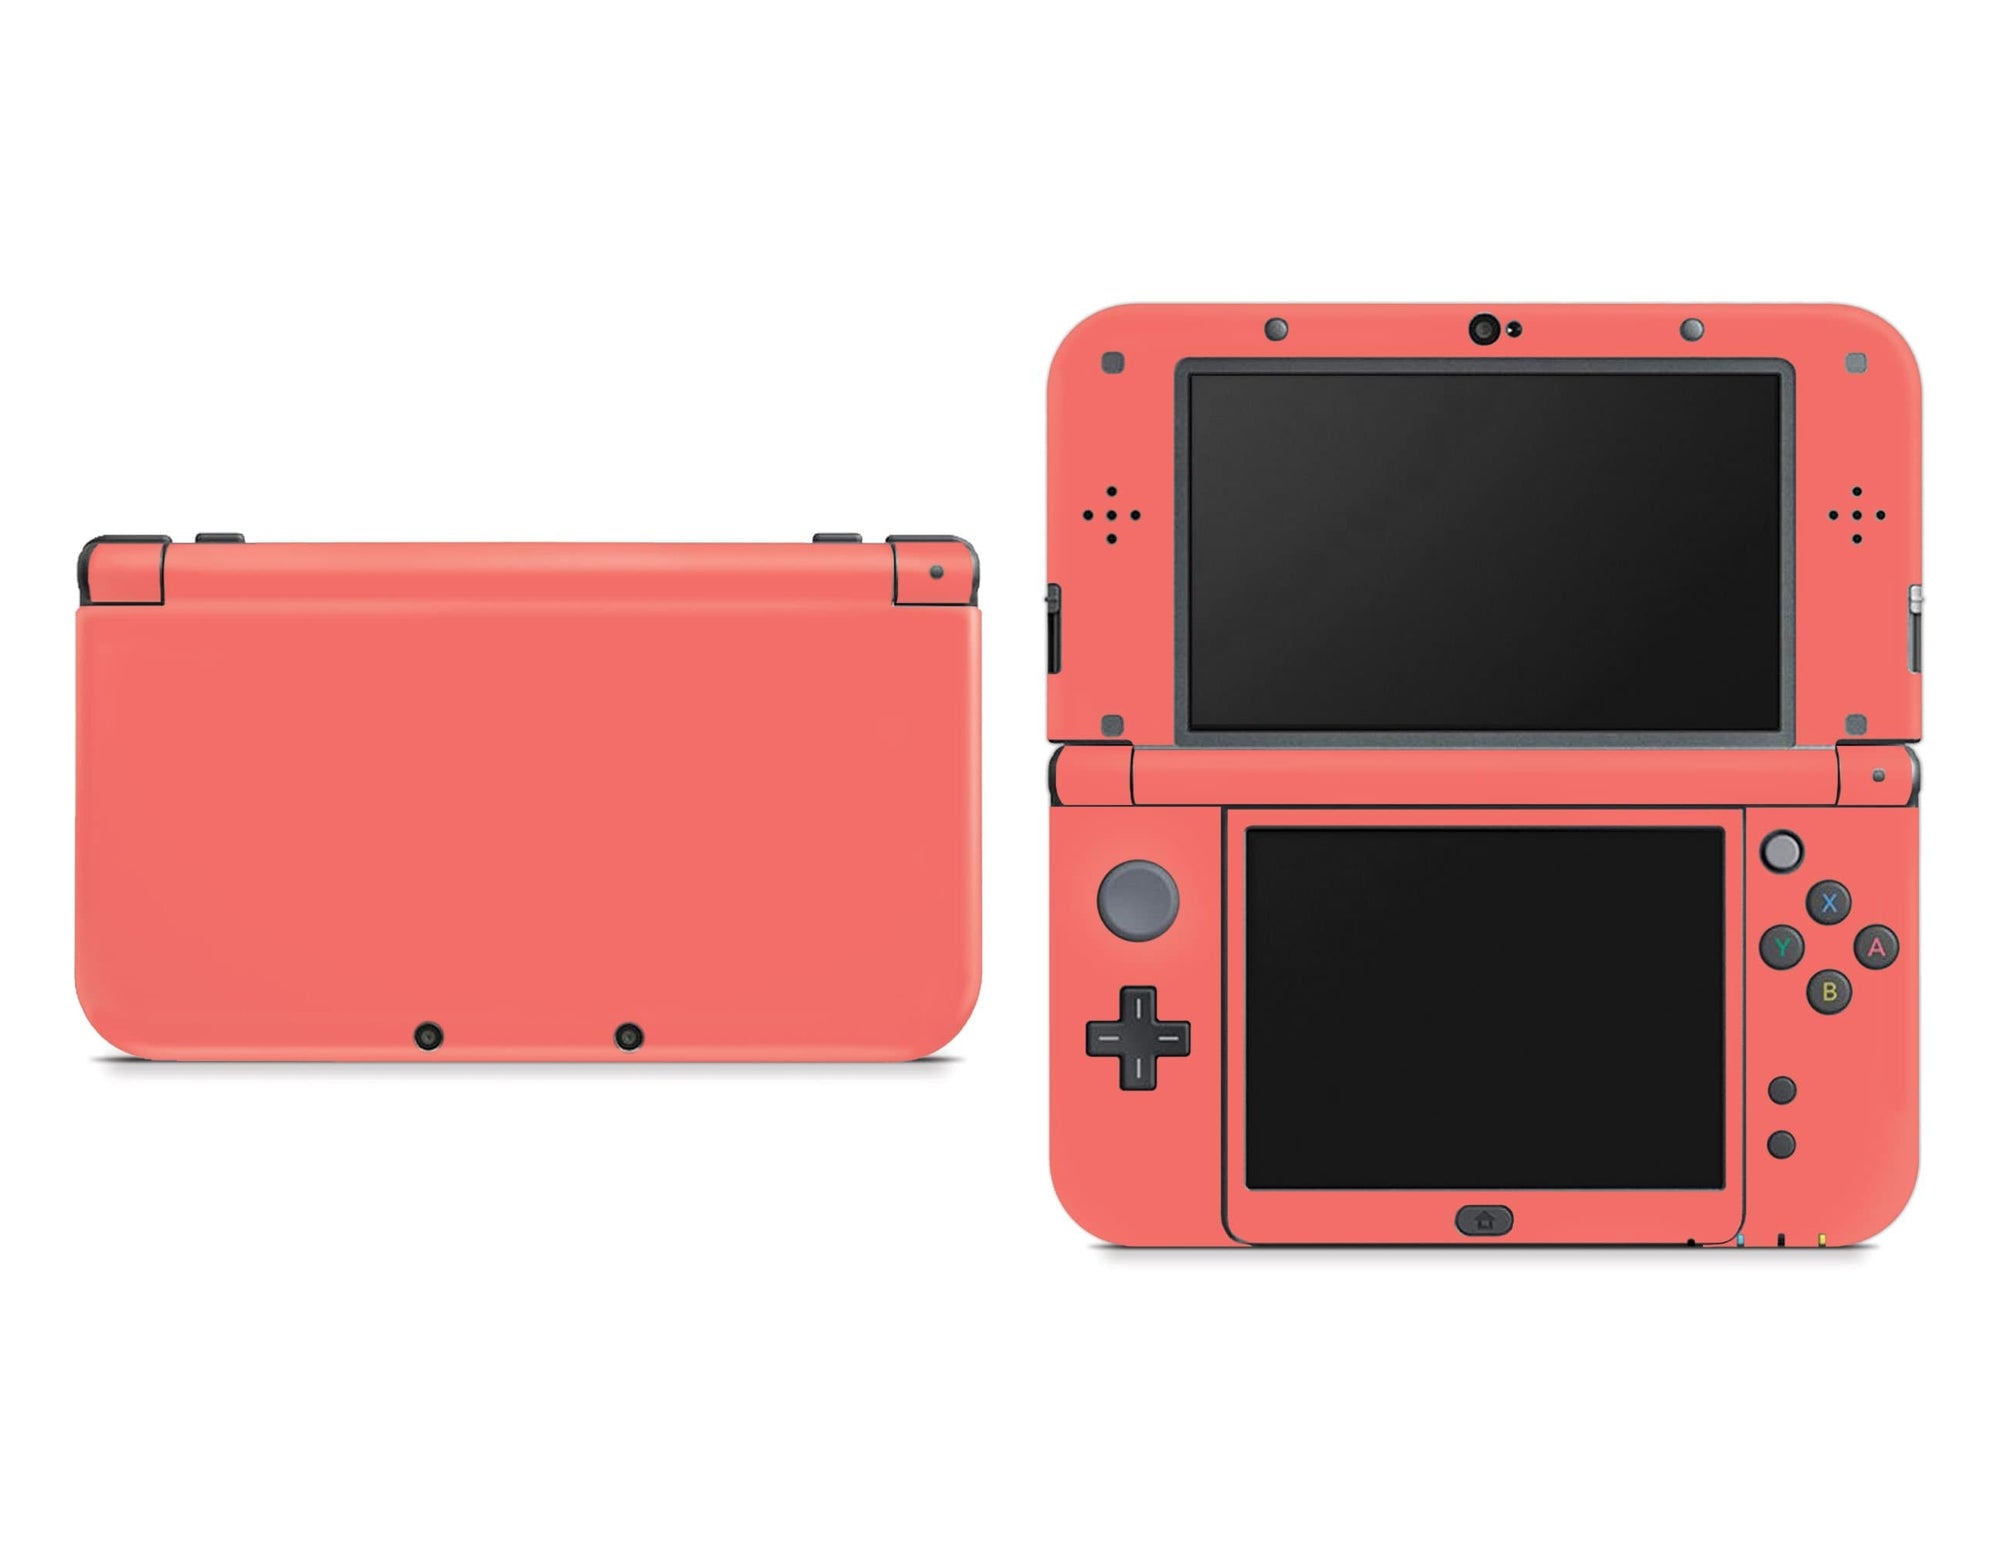 Classic Solid Color Nintendo New 3DS XL Skin | Choose Your - StickyBunny